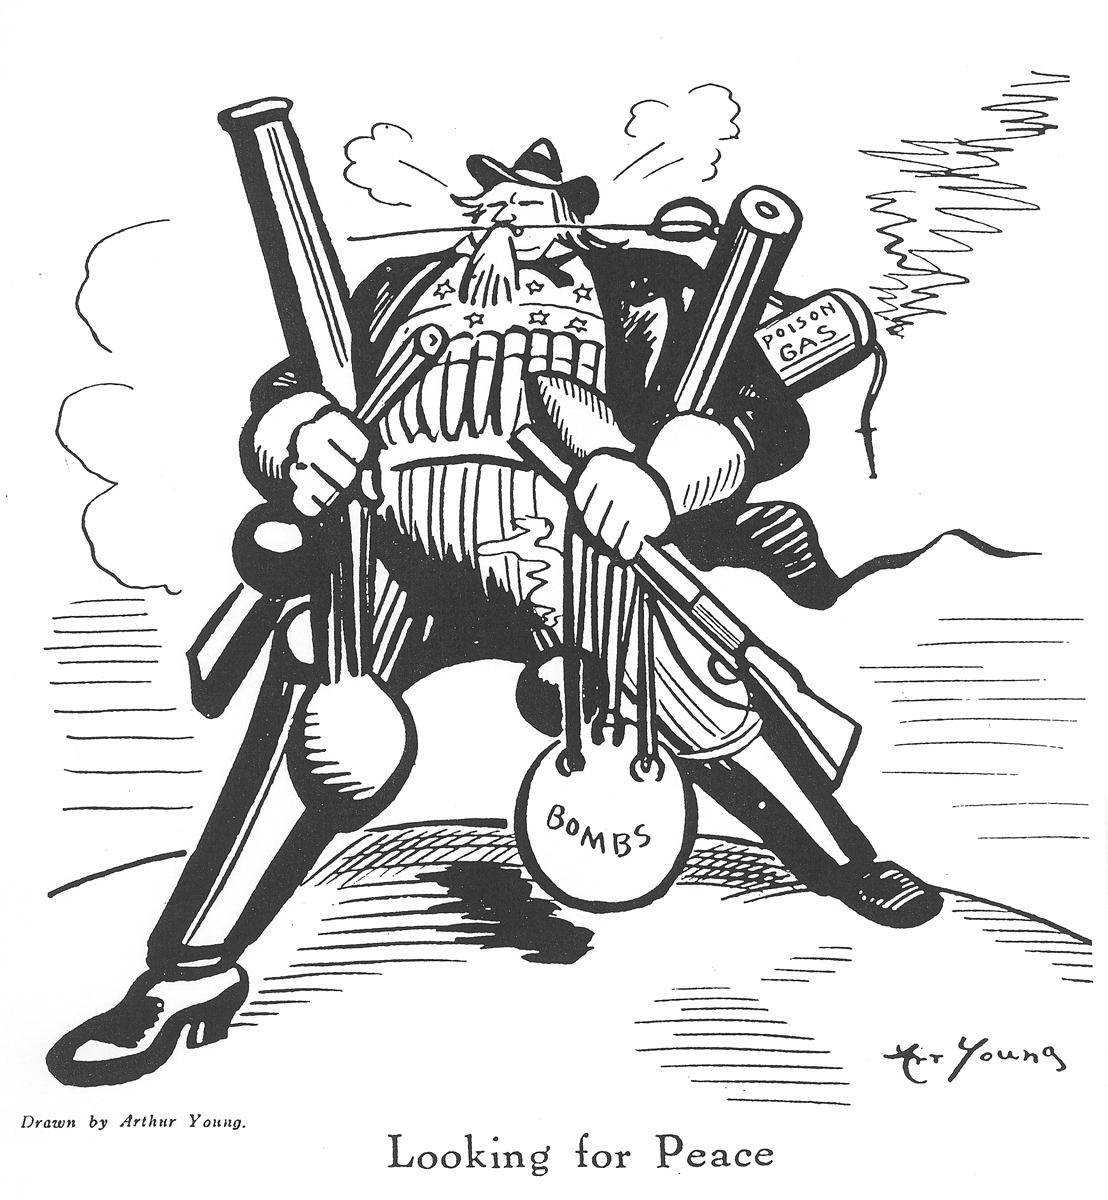 A huge U.S. military man holds a cannon and bombs, spewing poison gas and clutching a sword between his teeth. He strides across the landscape "Looking for Peace." An allegory criticizing U.S. intervention in the Mexican Revolution.